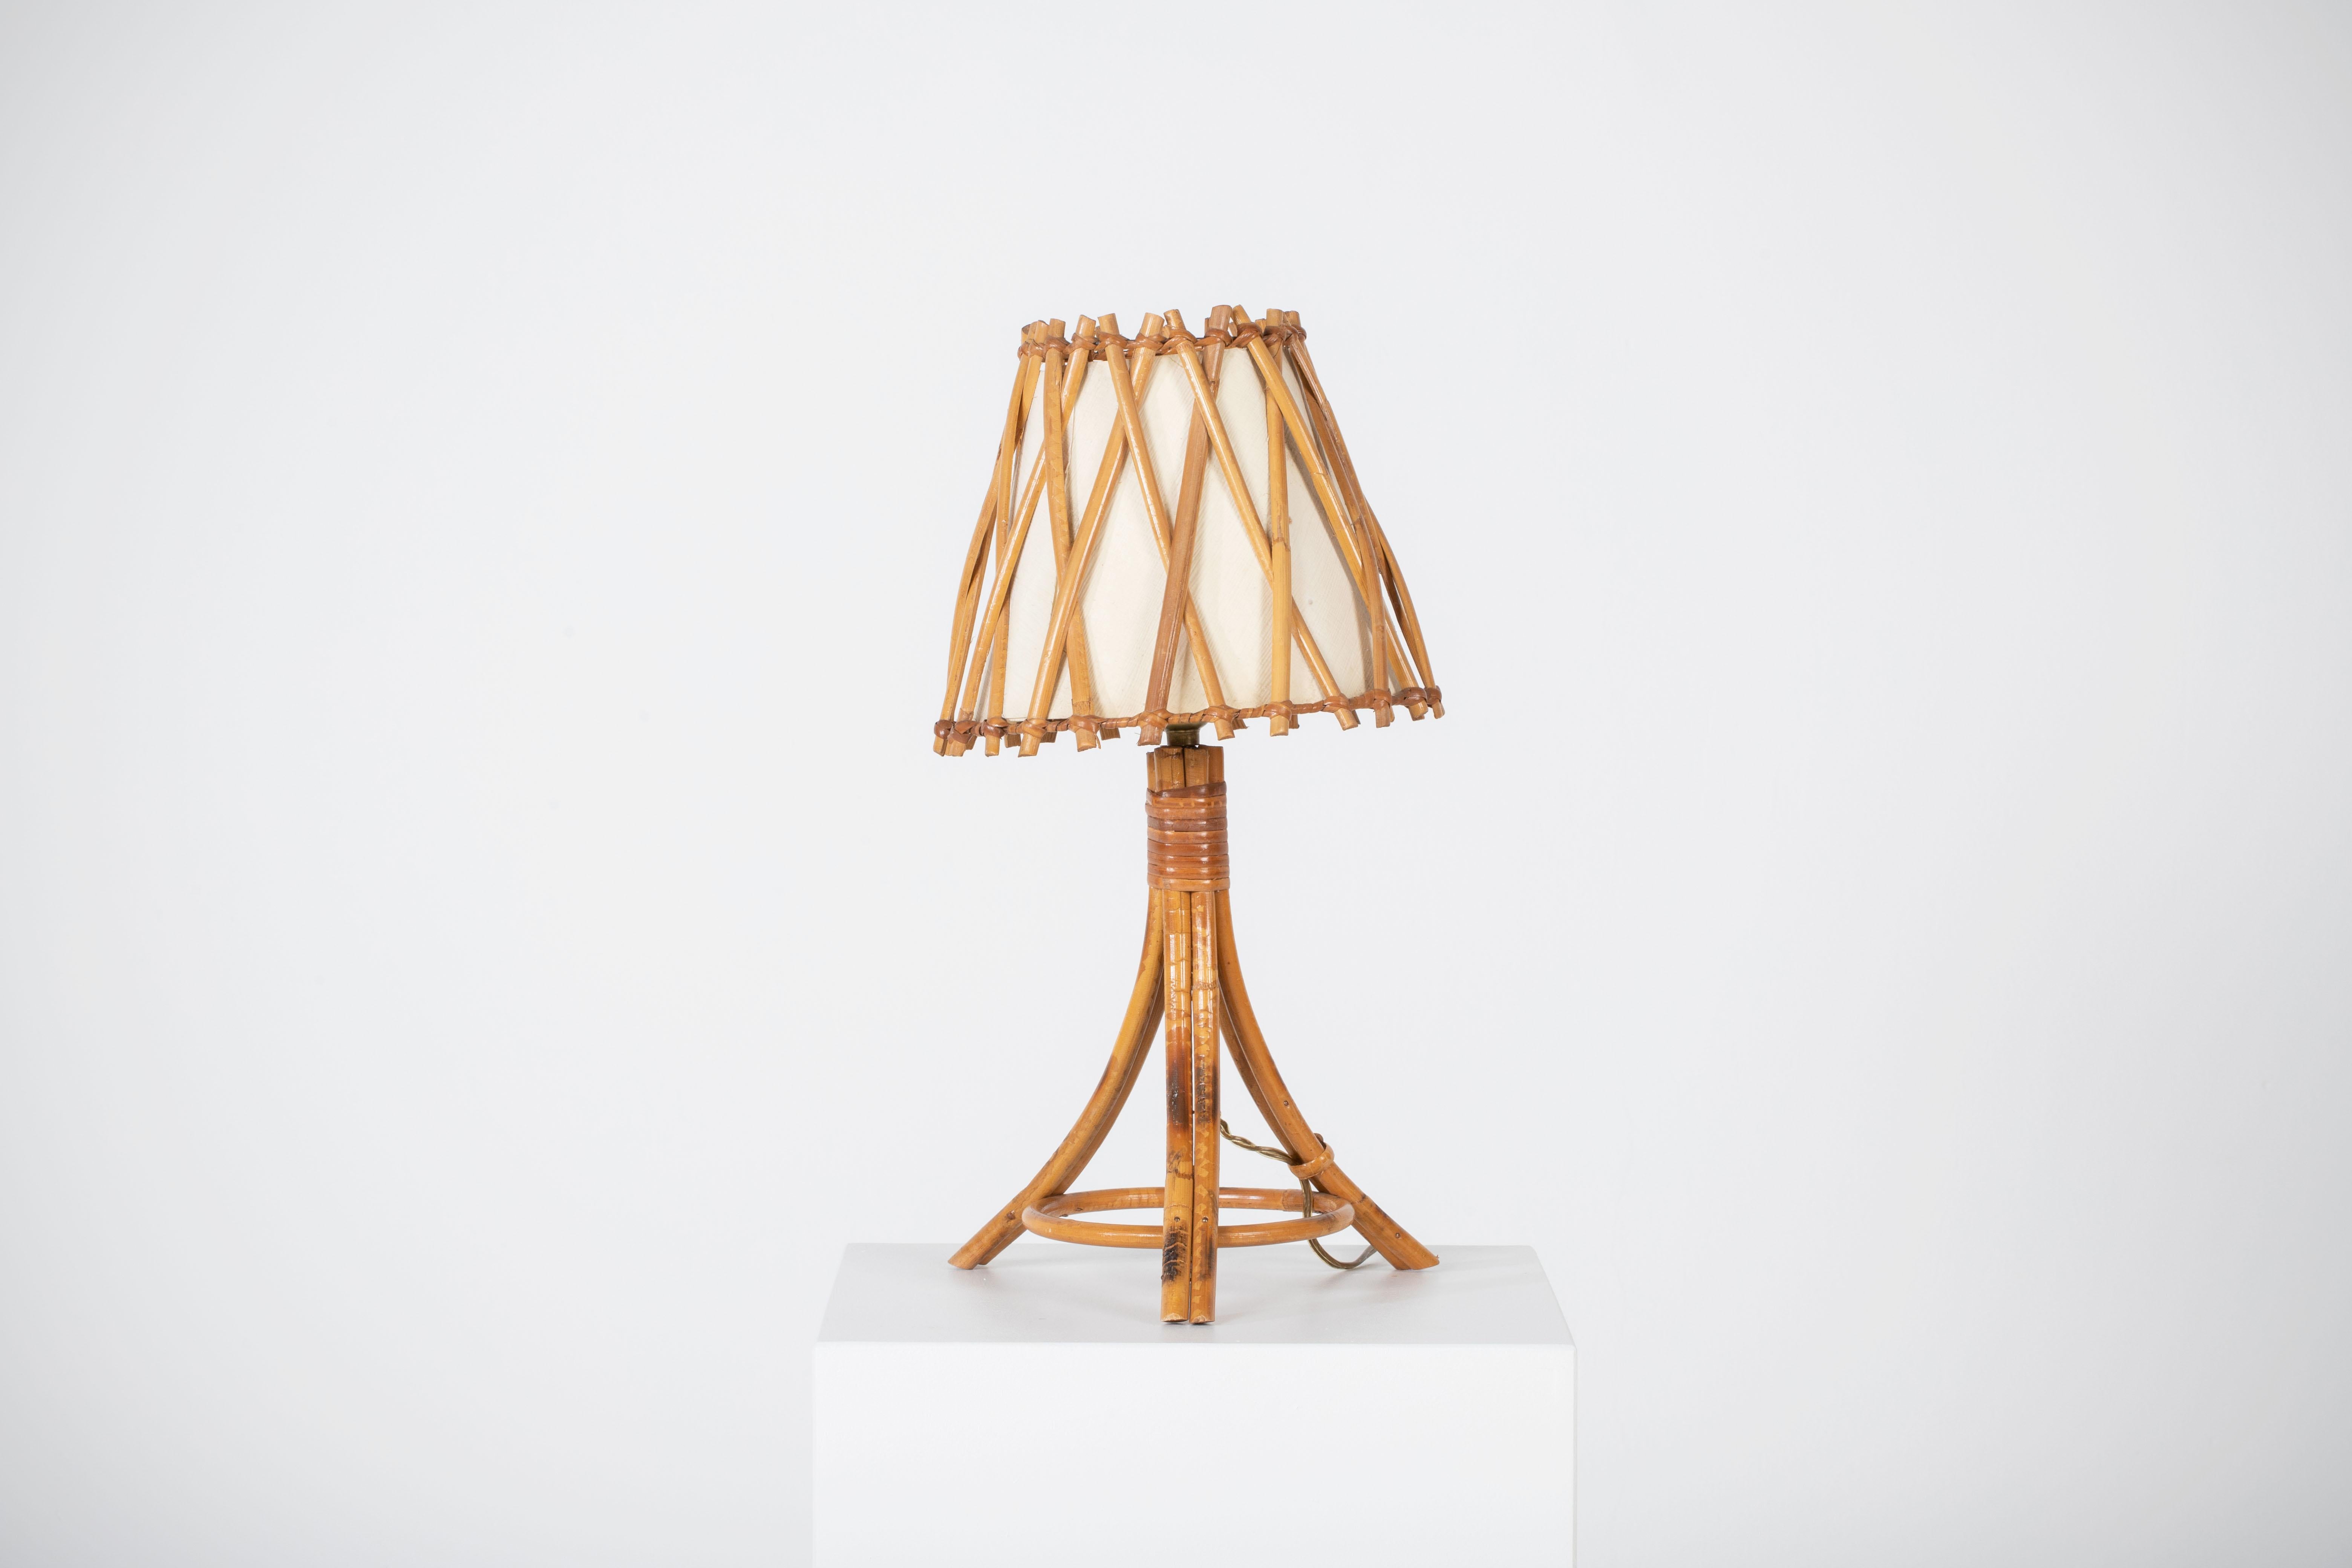 French Mid-century Rattan lamp, Louis Sognot, France, 1960s.
Originality, soft and warm light, to be placed in any room of the house.
Good vintage condition.

